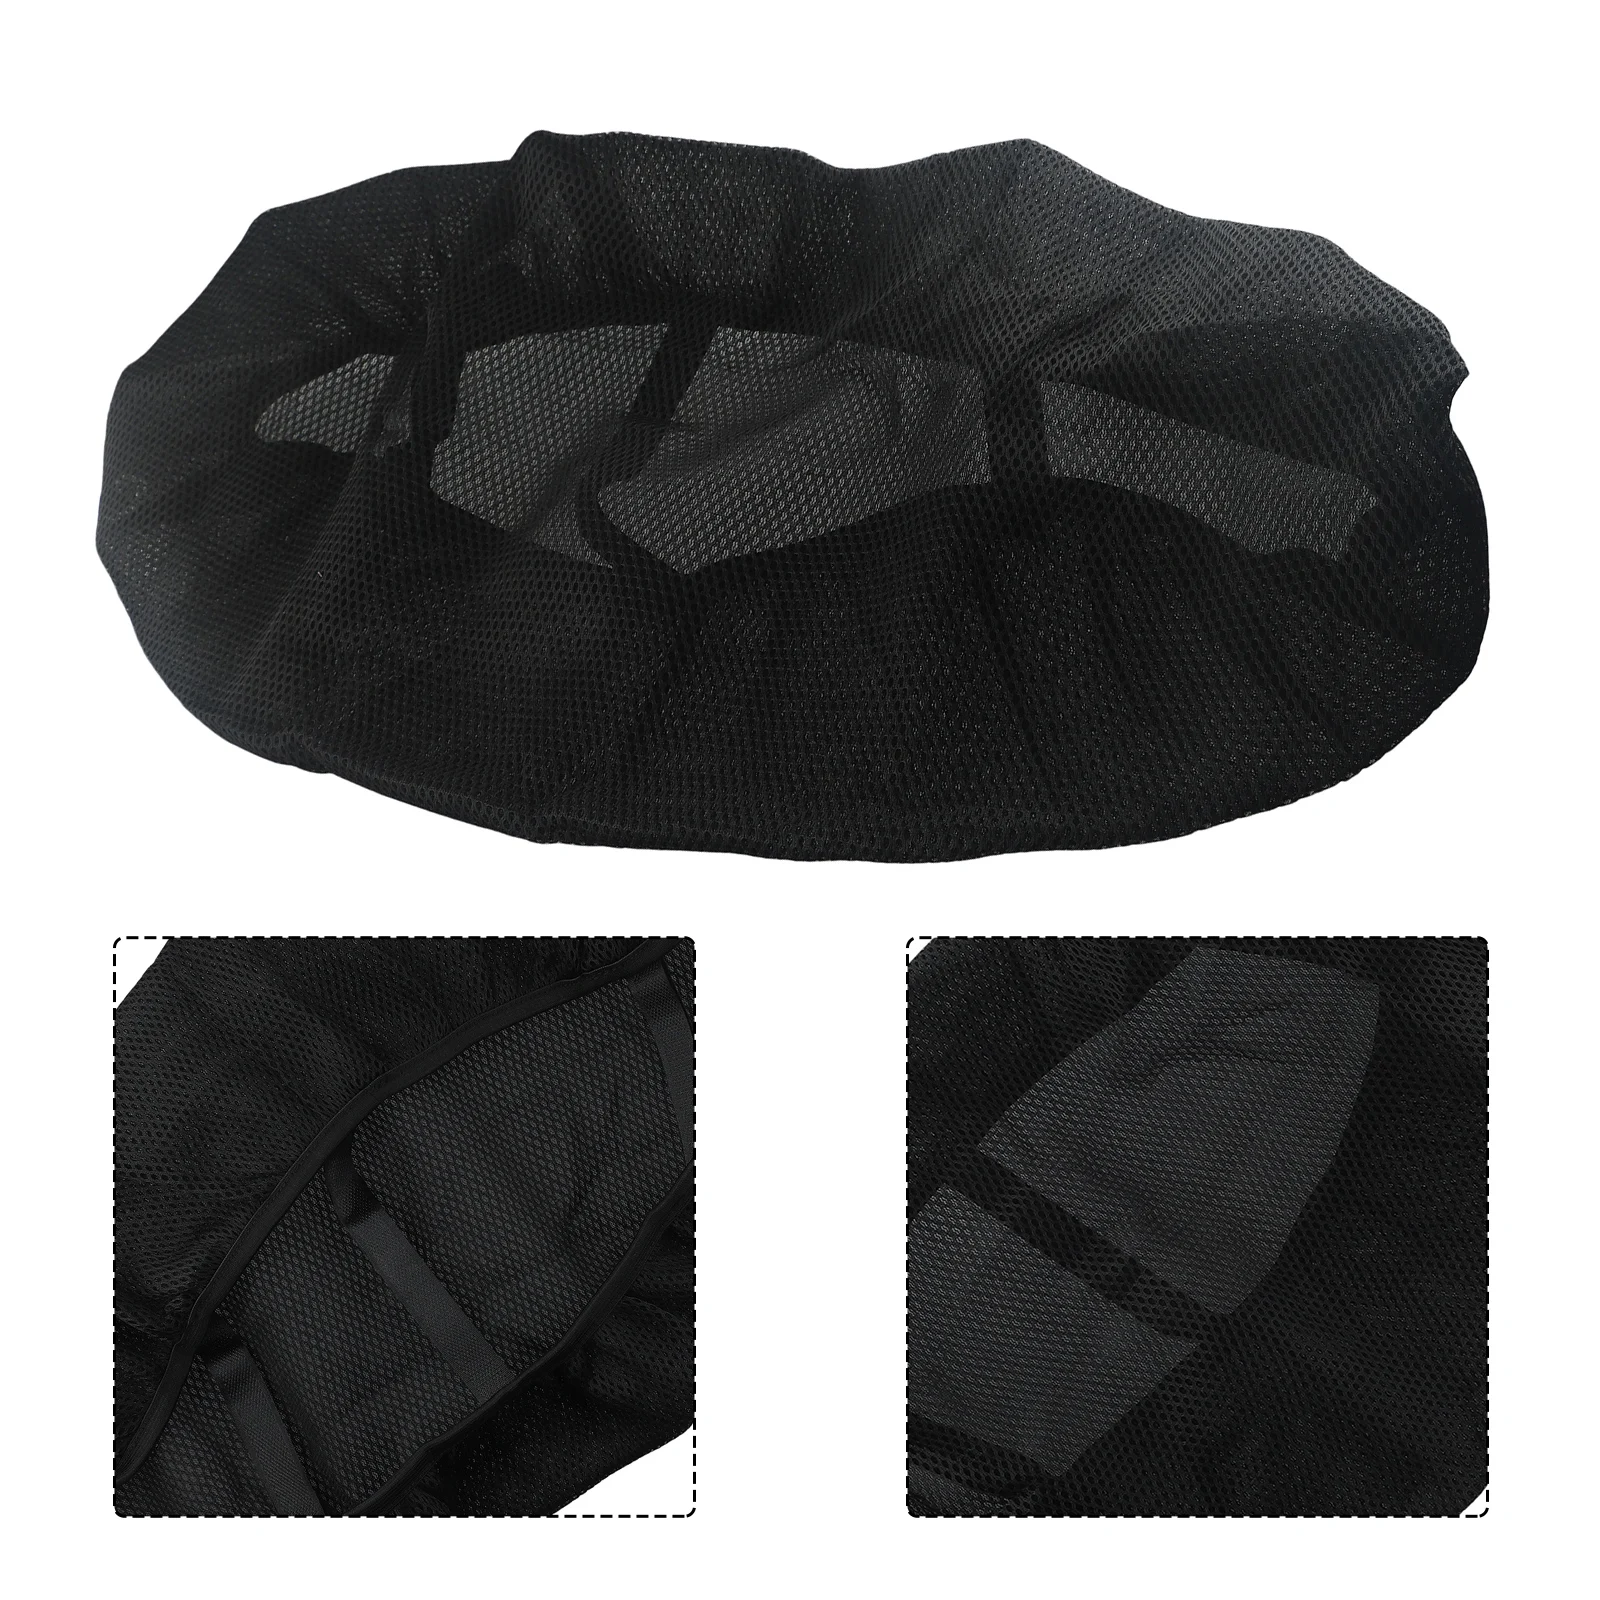 Motorcycle Cushion Seat Cover Motorcycle Mildew-proof Moisture-proof Motorcycle Pad Net 85*60CM Black Breathable